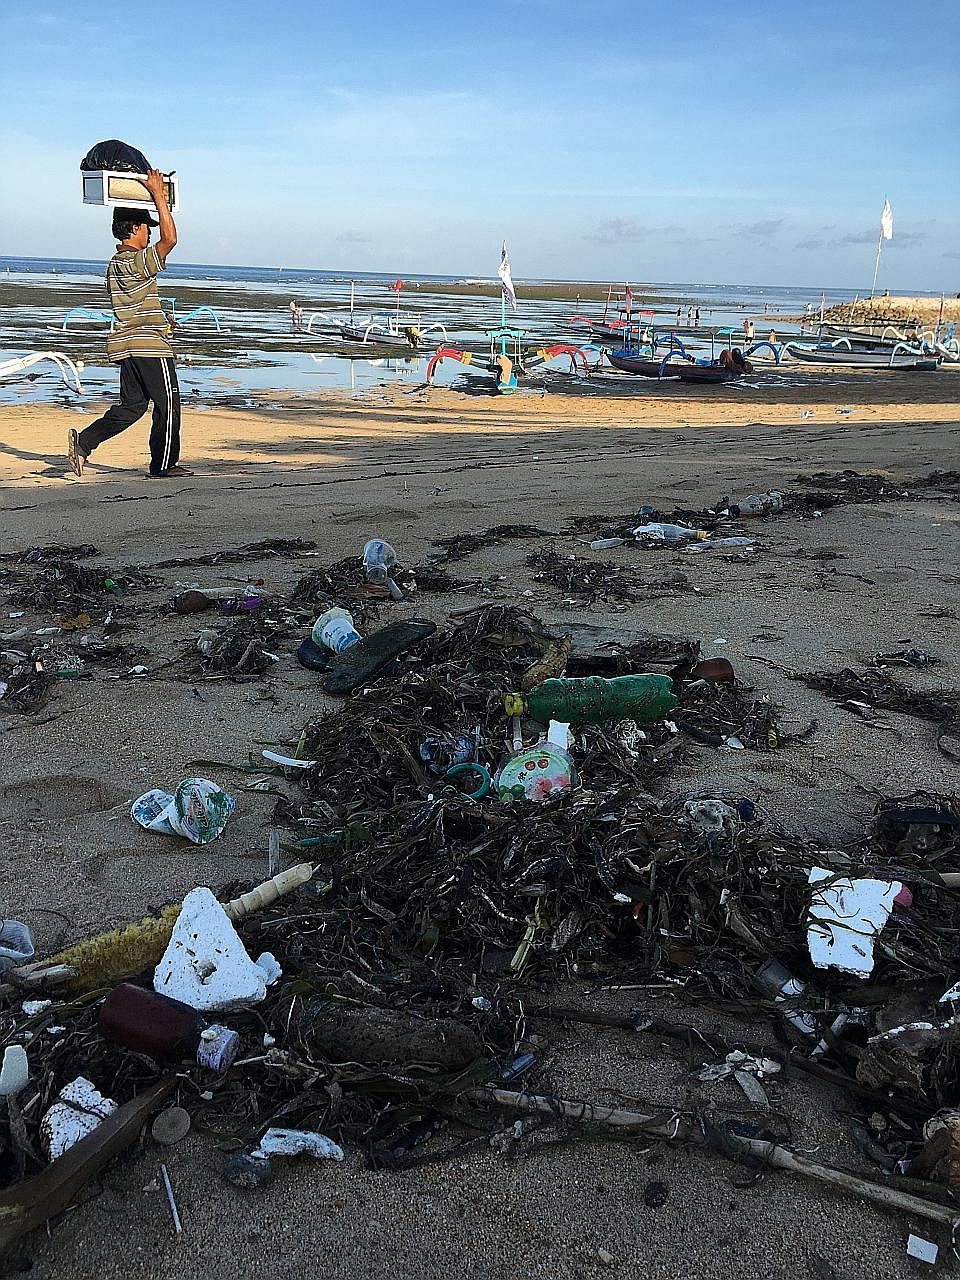 Over 40,000kg of garbage was collected in a single day in Bali's Biggest Beach Clean-up campaign earlier this year. The critical challenge for tourism authorities in South-east Asia is to ensure that unchecked economic development does not threaten t